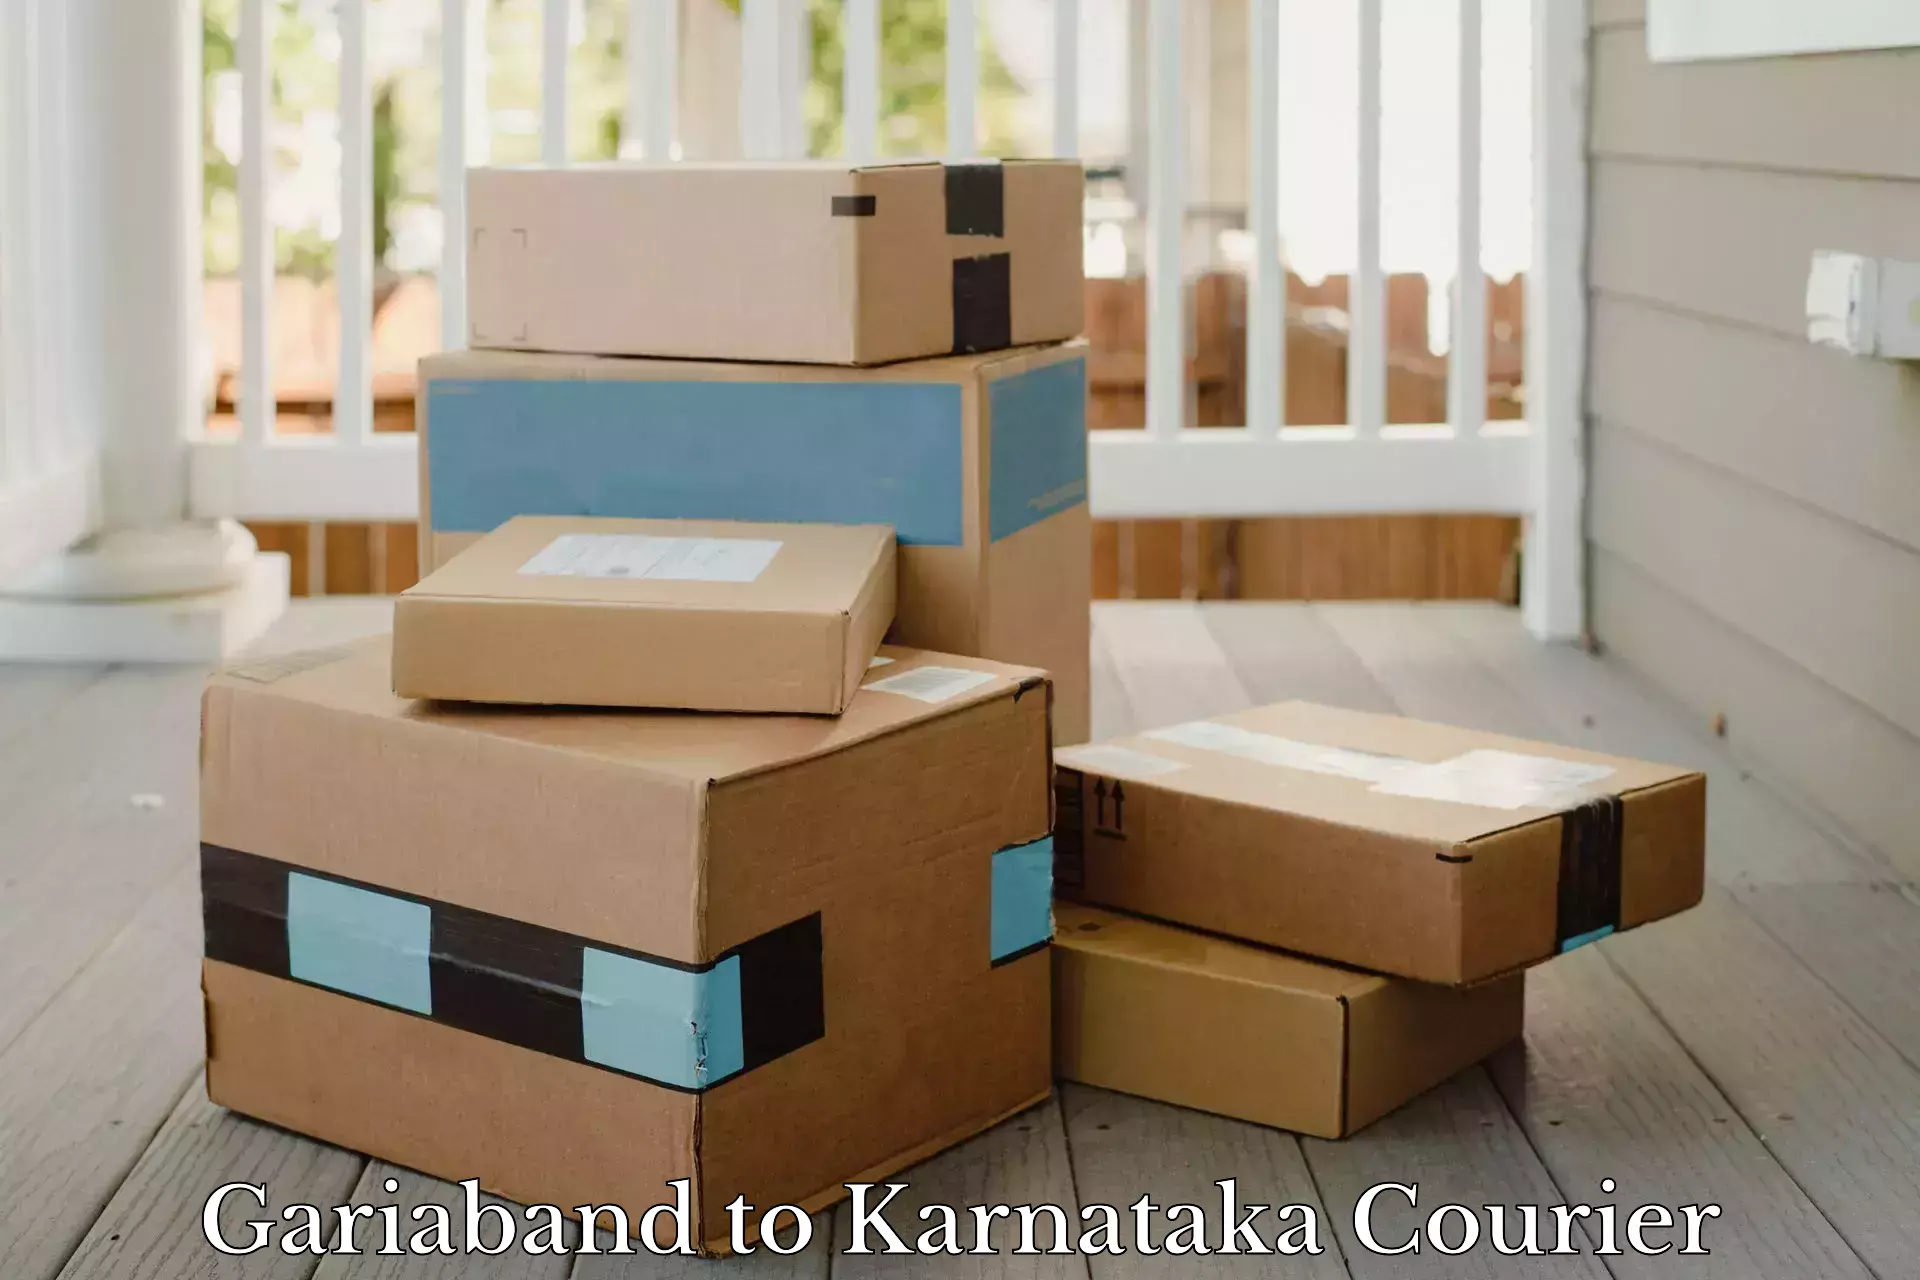 Easy access courier services Gariaband to Karnataka